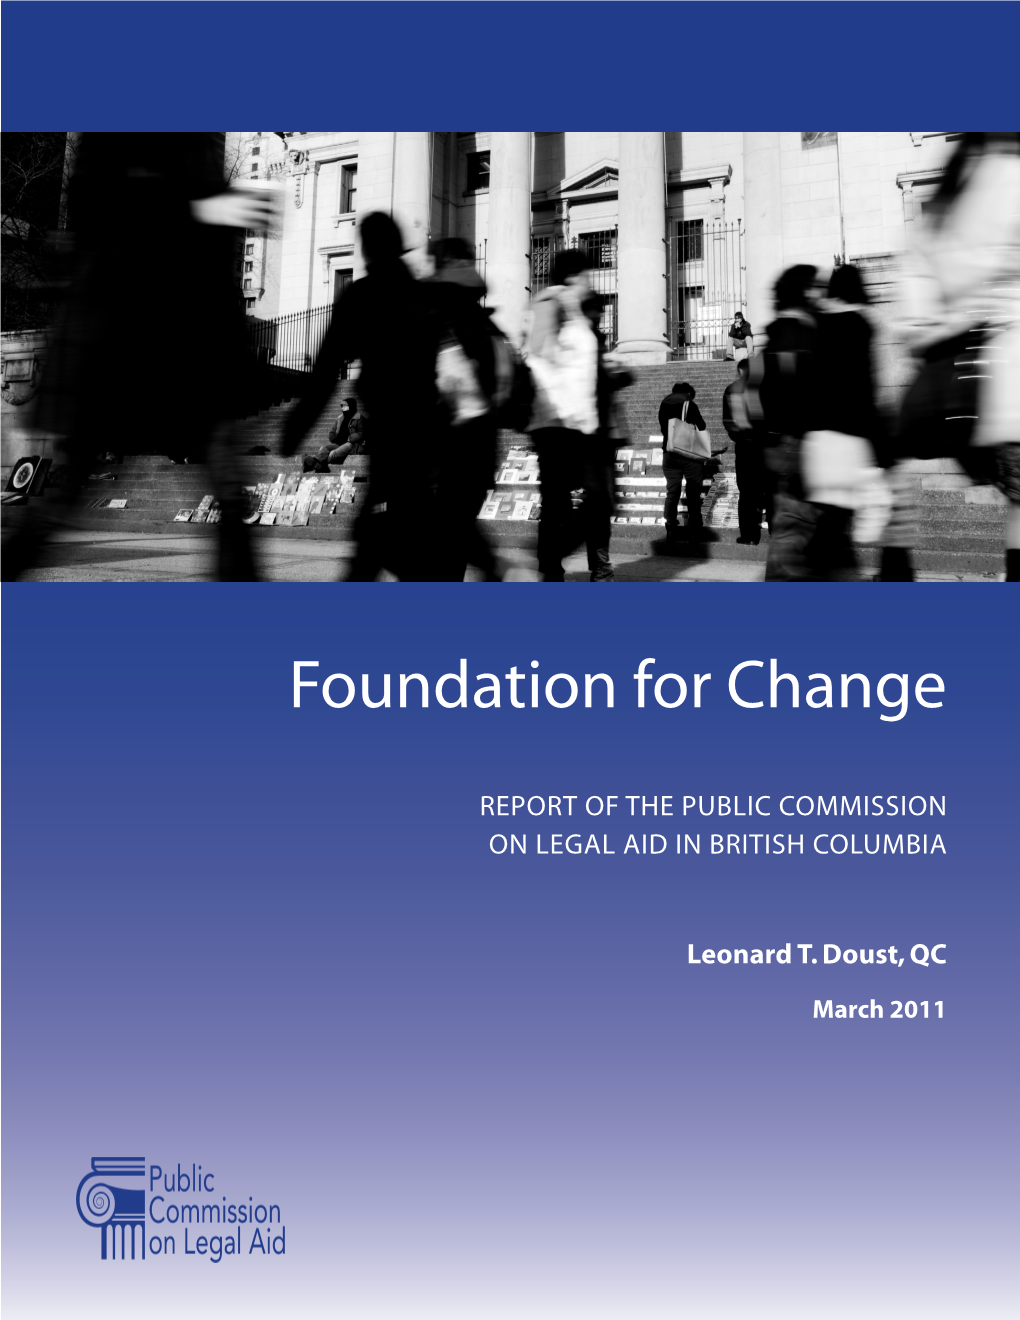 FOUNDATION for CHANGE: Report of the Public Commission on Legal Aid in British Columbia by Leonard T